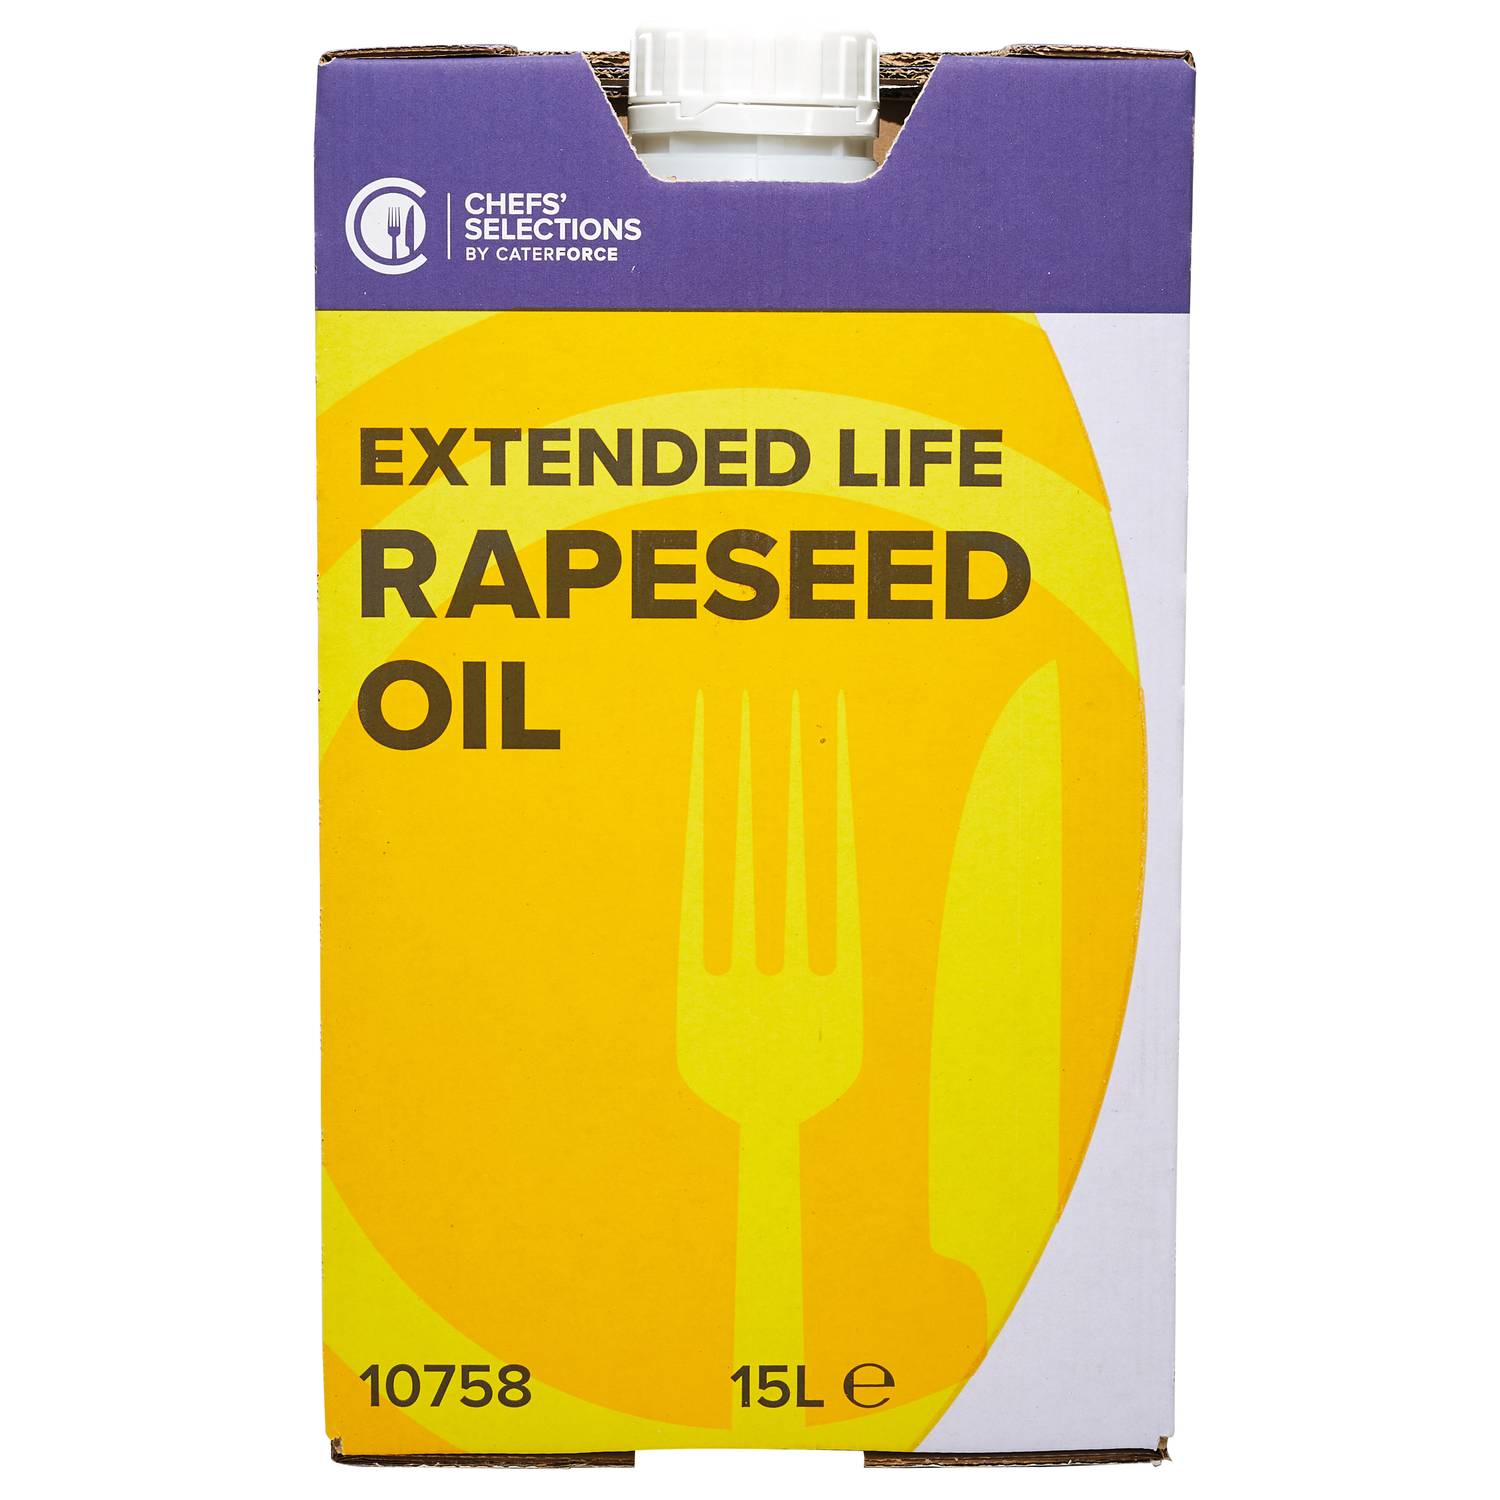 Chefs’ Selections Extended Life Rapeseed Oil BiB (1 x 15L)